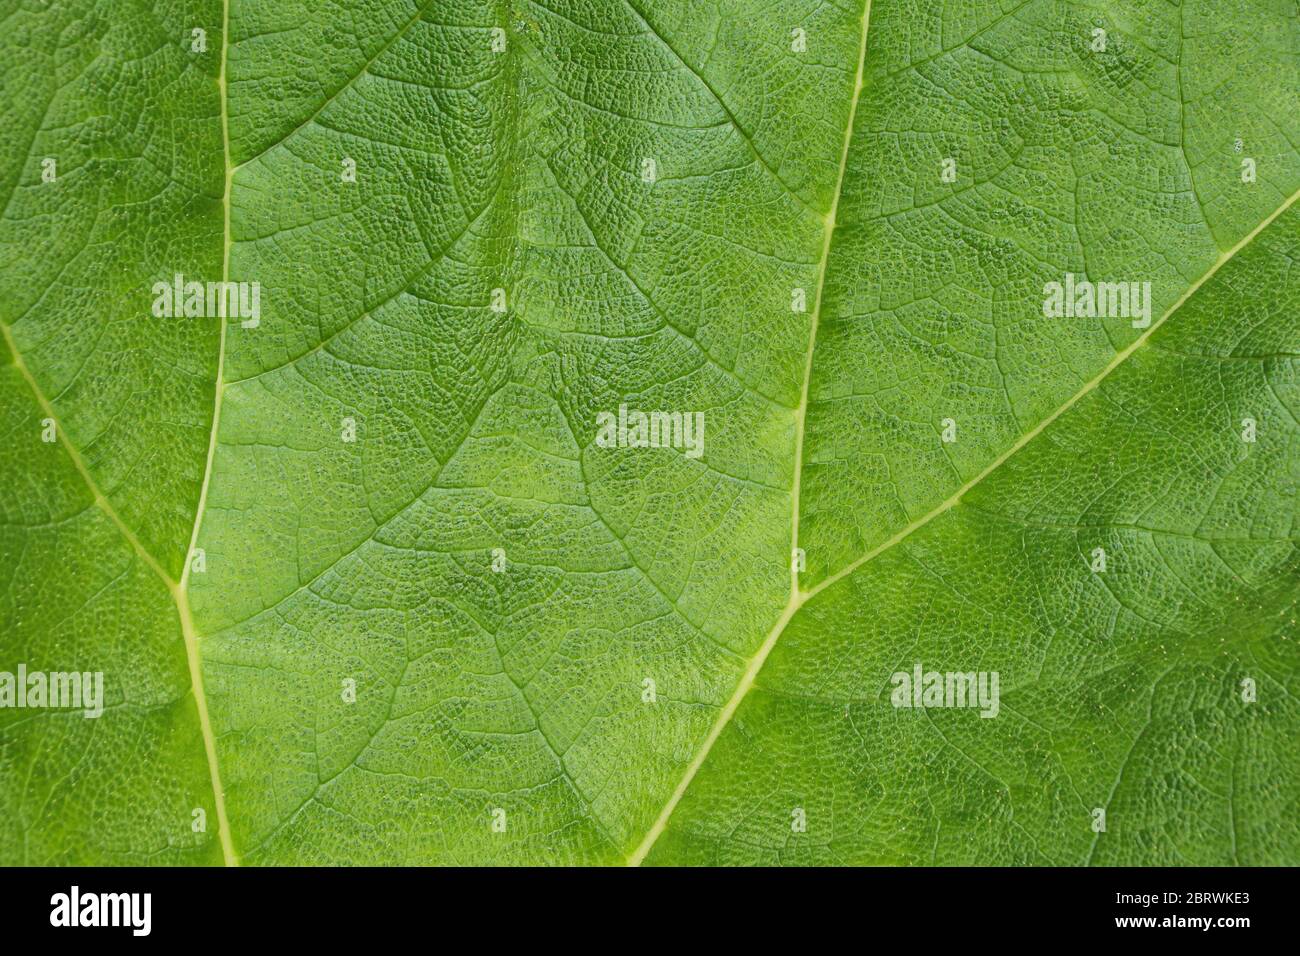 Close up of leaf surface showing veins and textures of a Gunnera leaf. Stock Photo